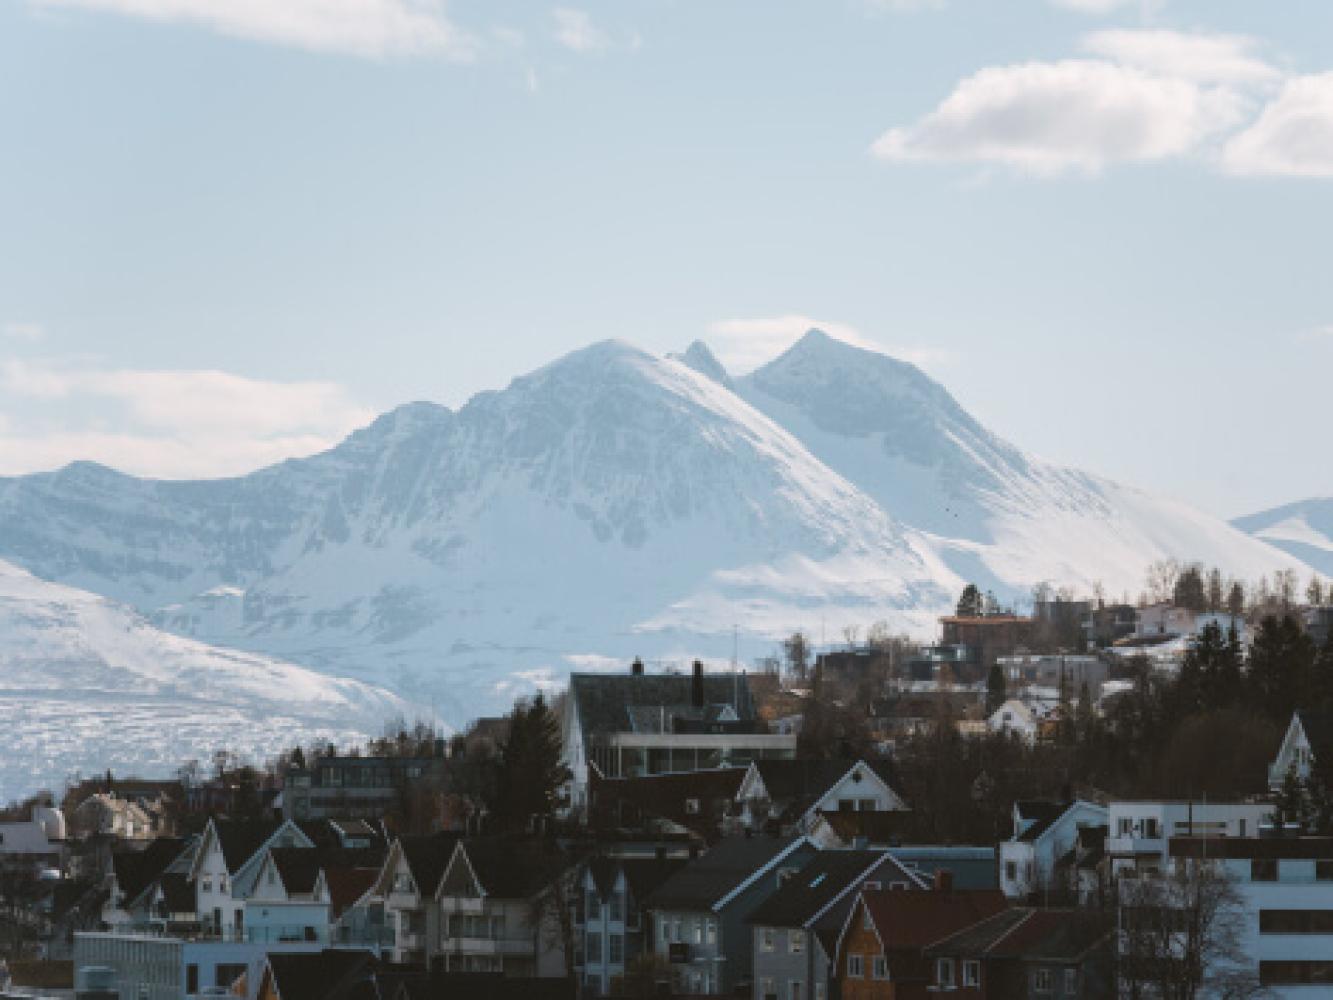 Image of Tromsø city with mountains in the background